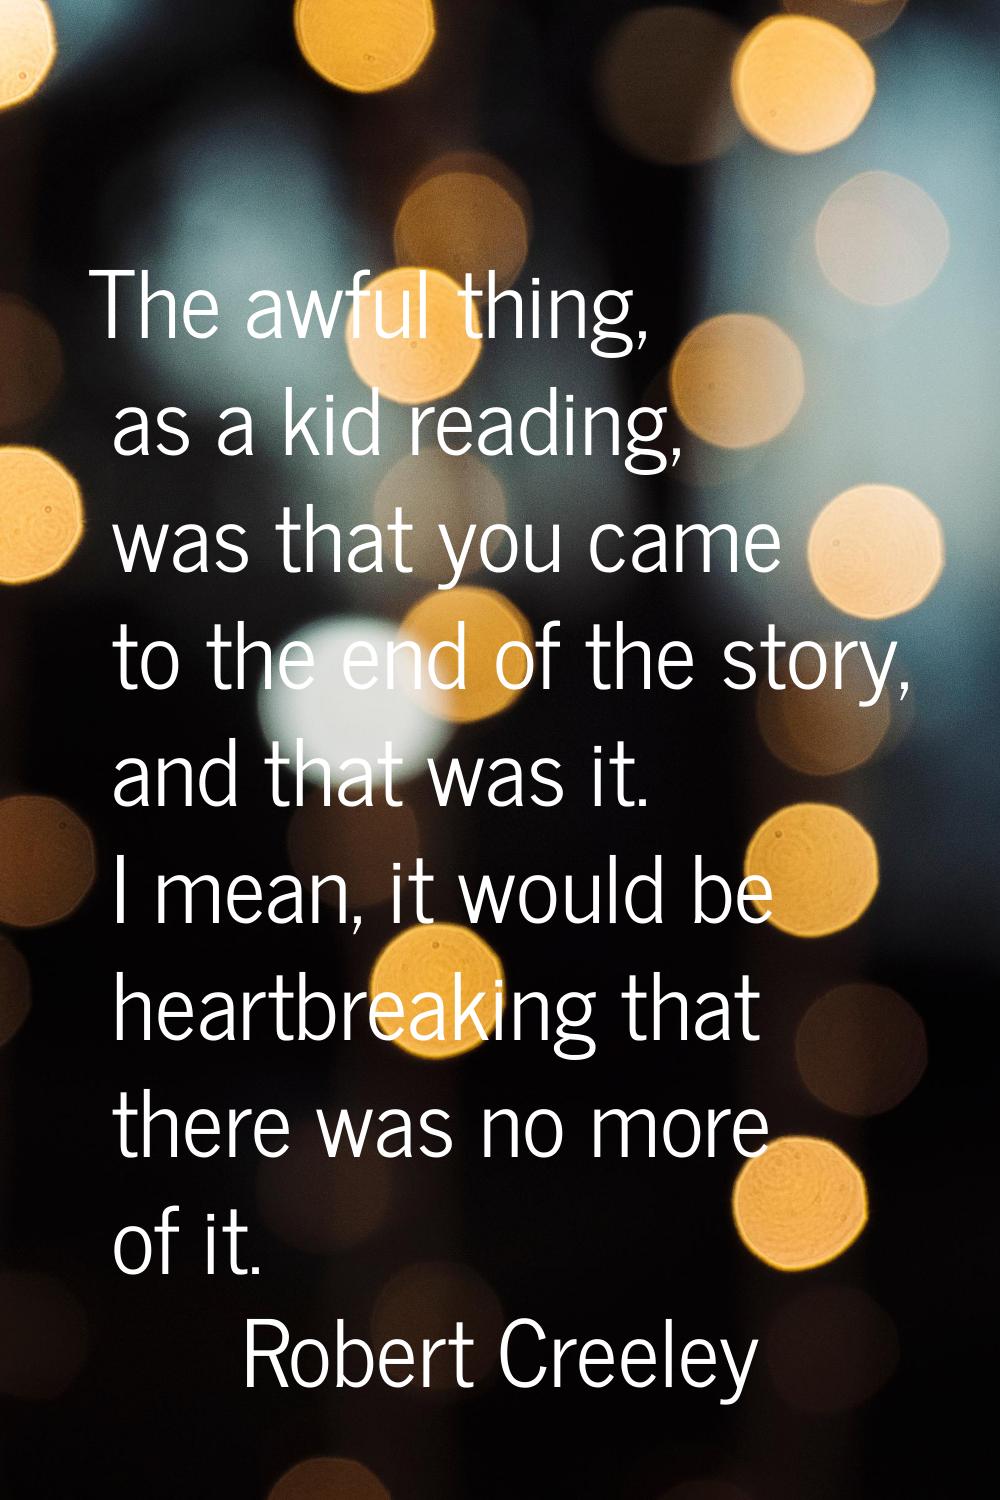 The awful thing, as a kid reading, was that you came to the end of the story, and that was it. I me